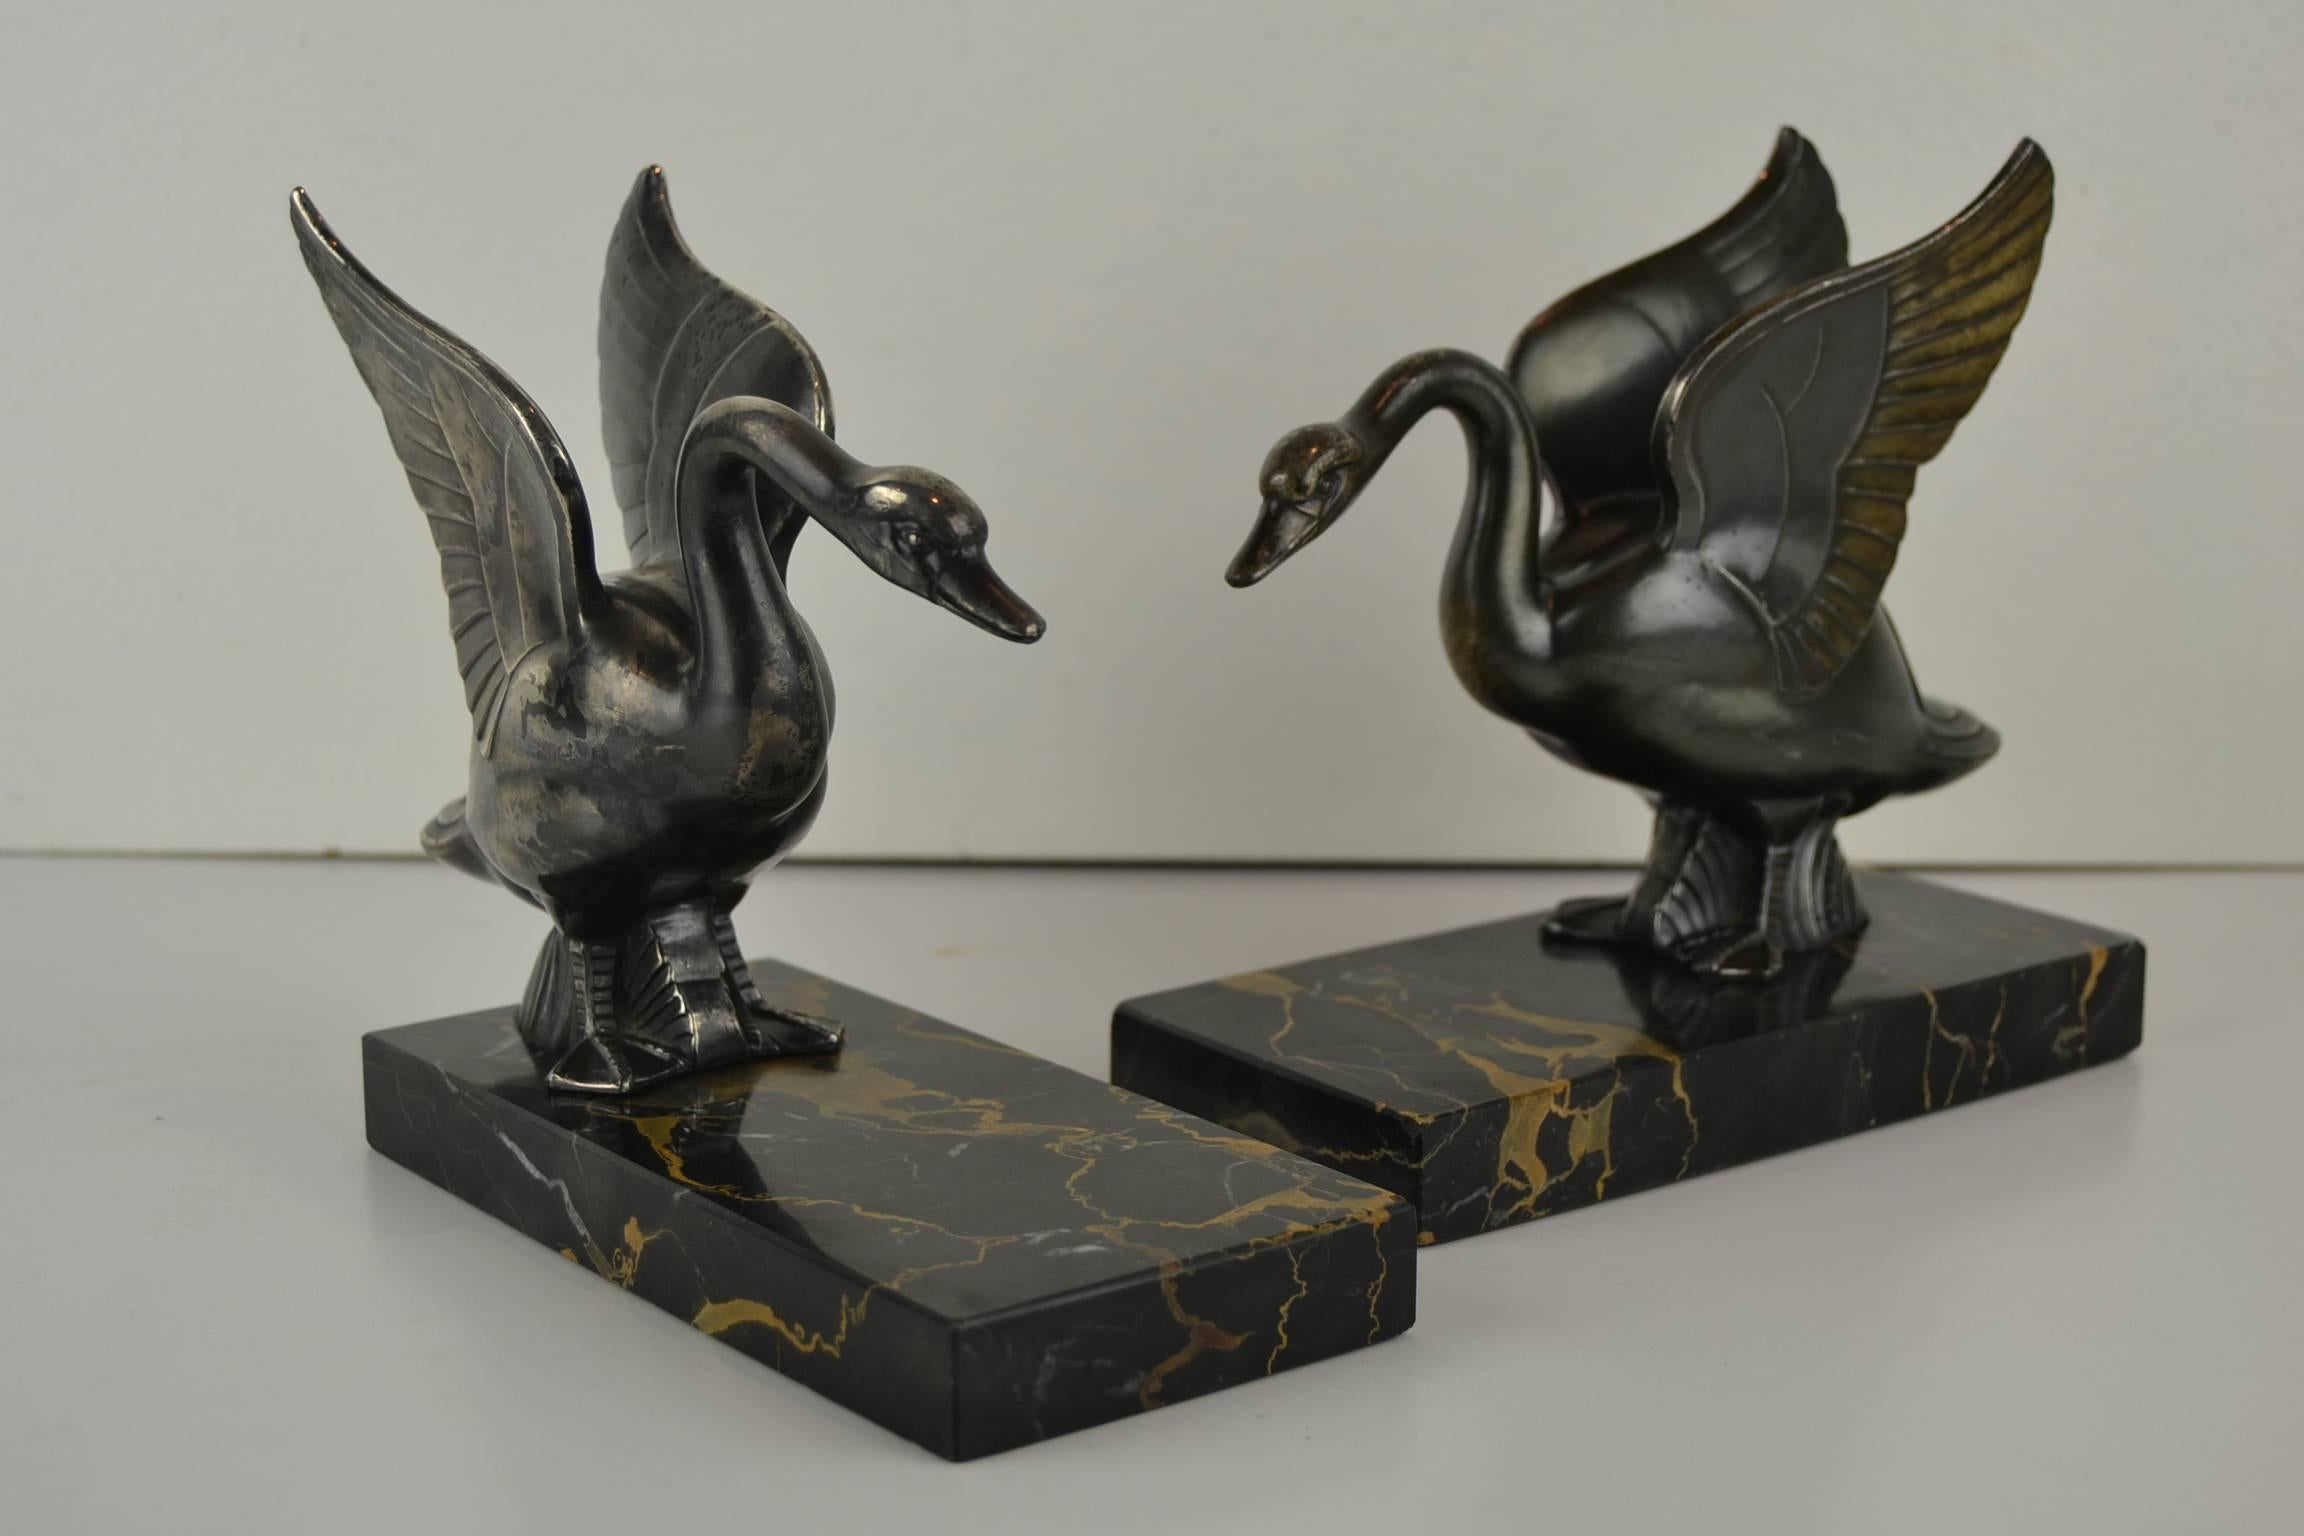 Impressive Pair of Large Art Deco Bookends with Swans .
These Animal Bookends were Made and Signed by Perrina Paris, France, circa 1930.
Bronzed Patina Painted Metal Swans Sculptures mounted over black and brown Marble Bases. 
Due age and use slight